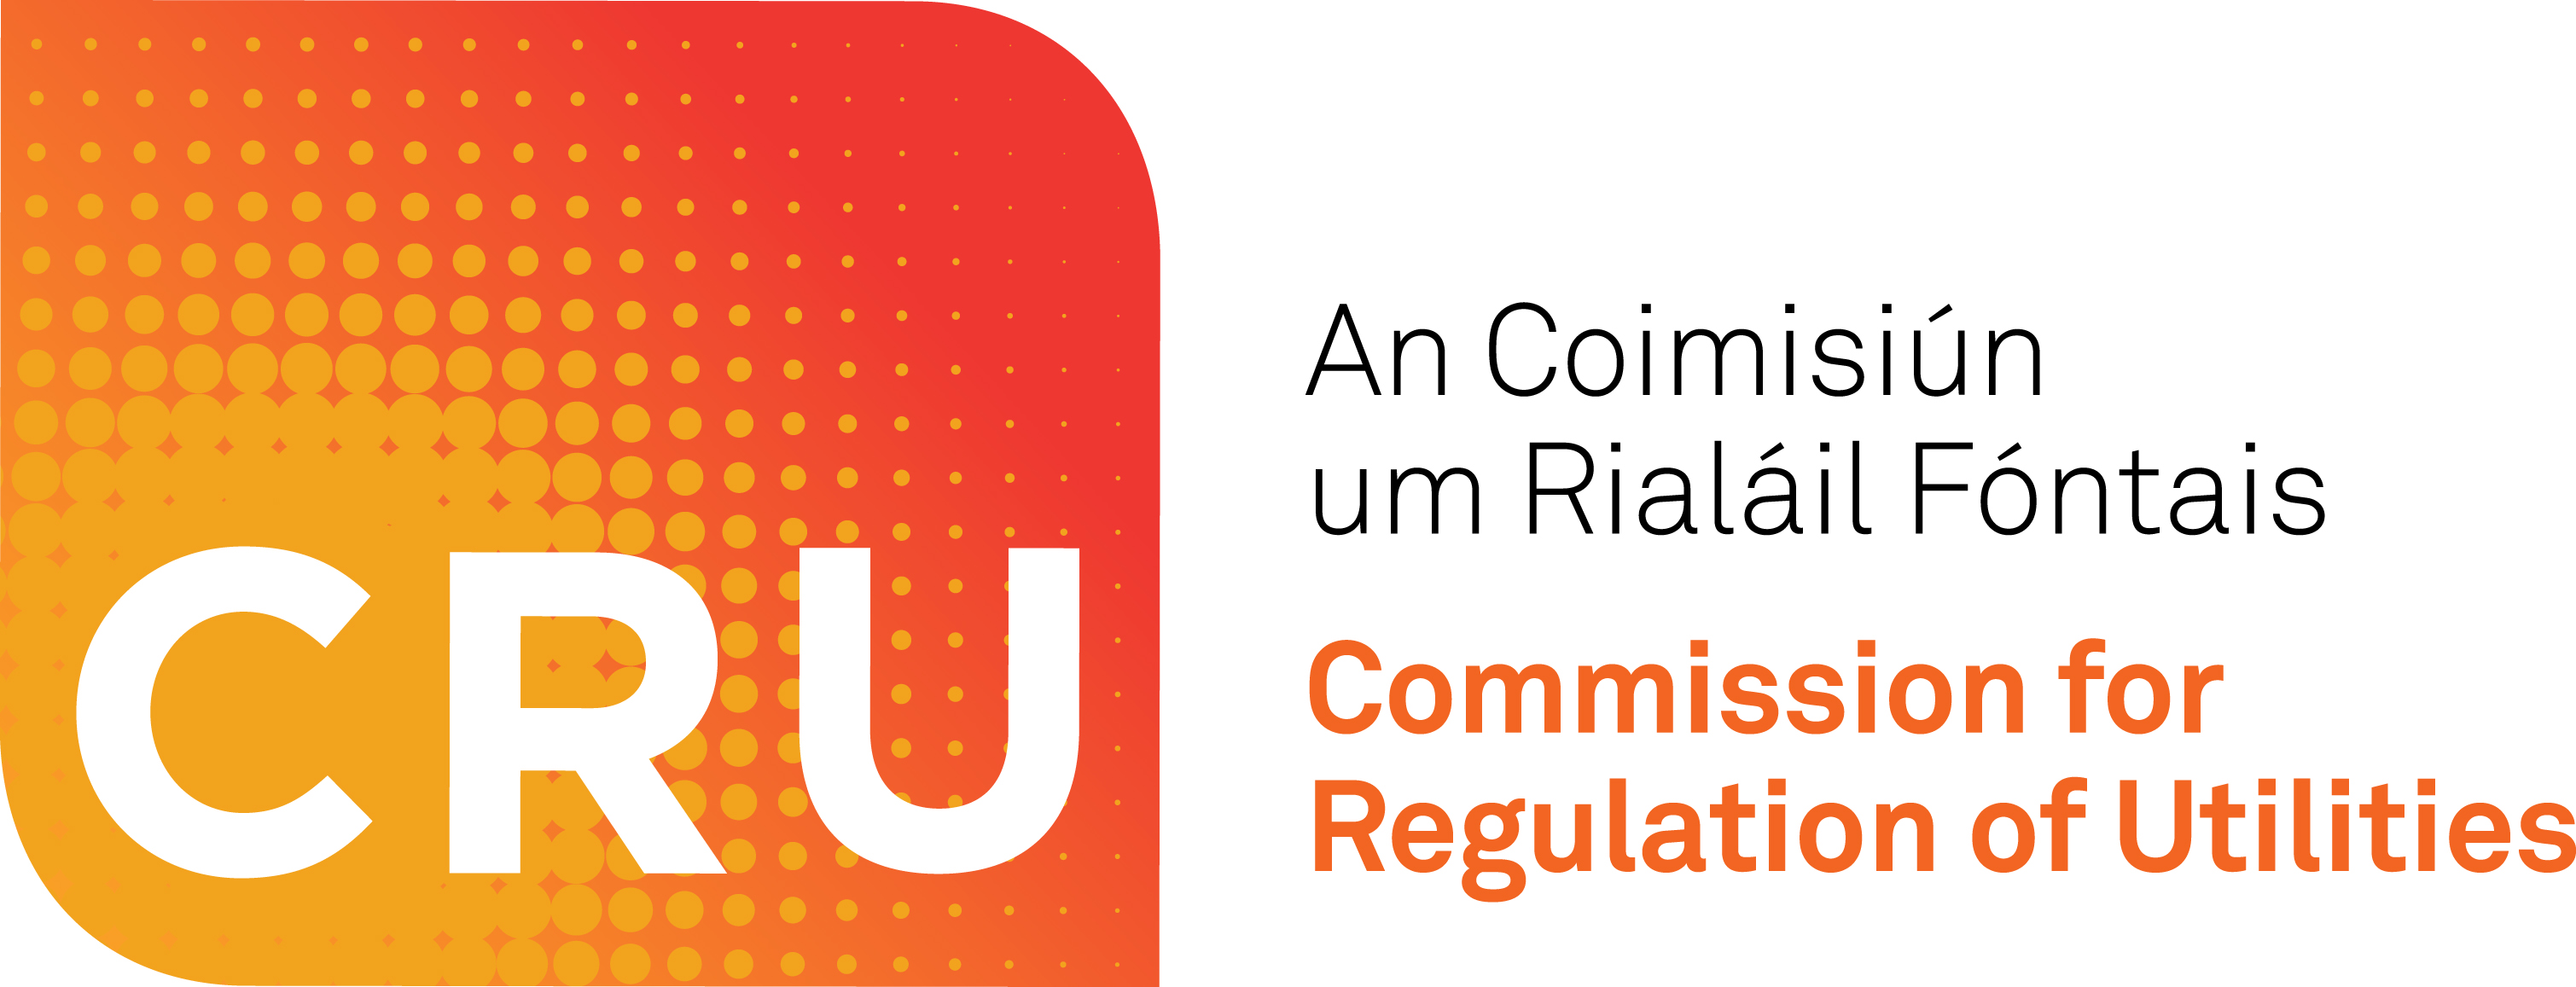 The Commission for Regulation of Utilities (CRU)